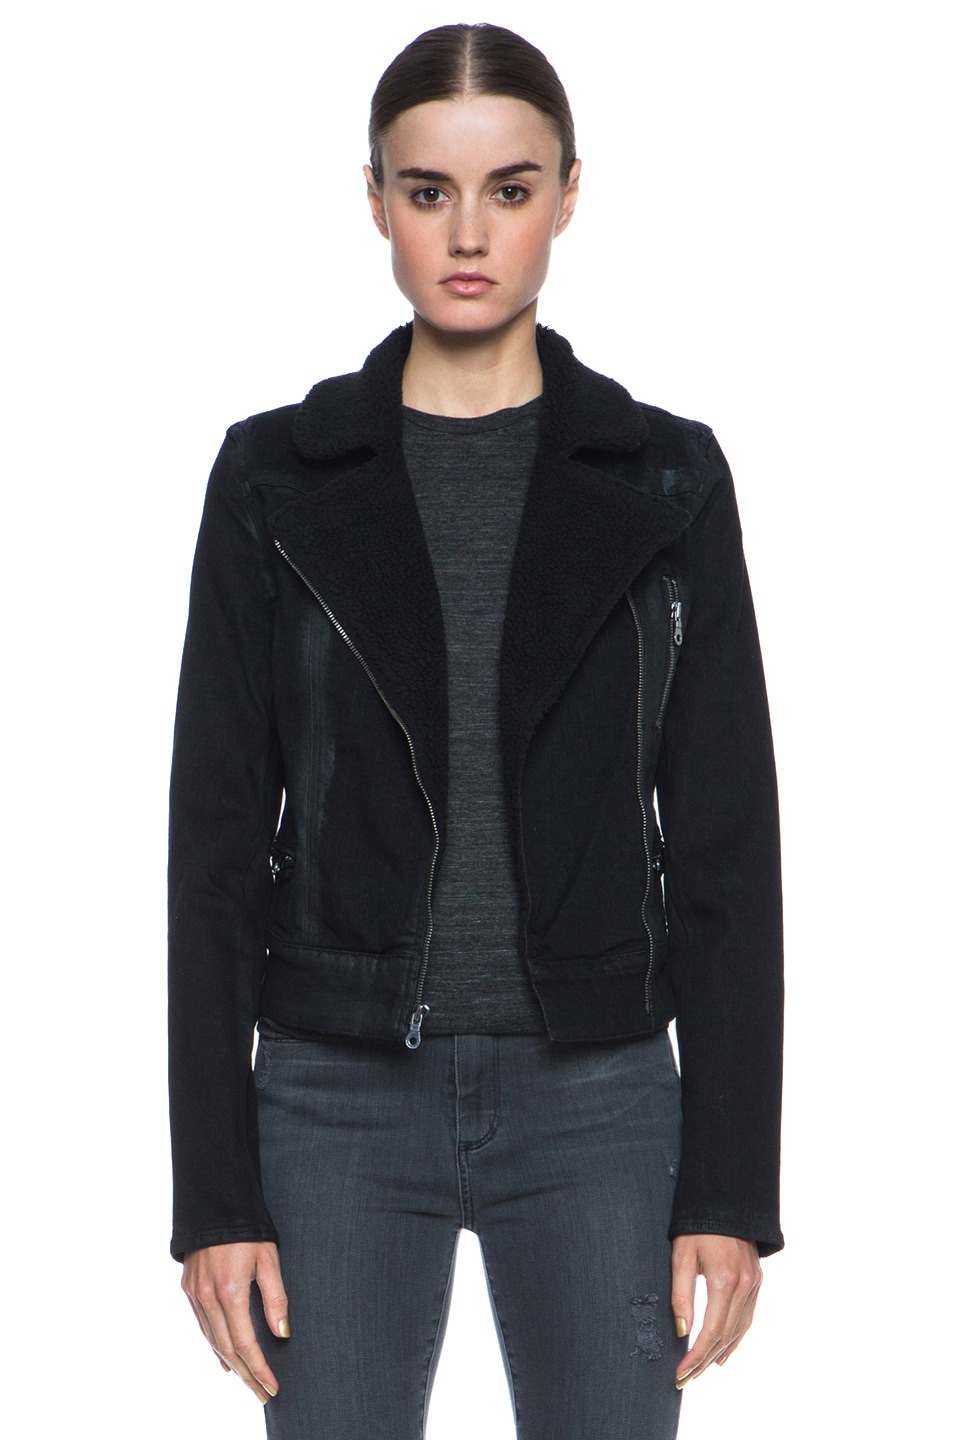 PAIGE Coated Jacket with Shearling Collar in Night Flight | FWRD